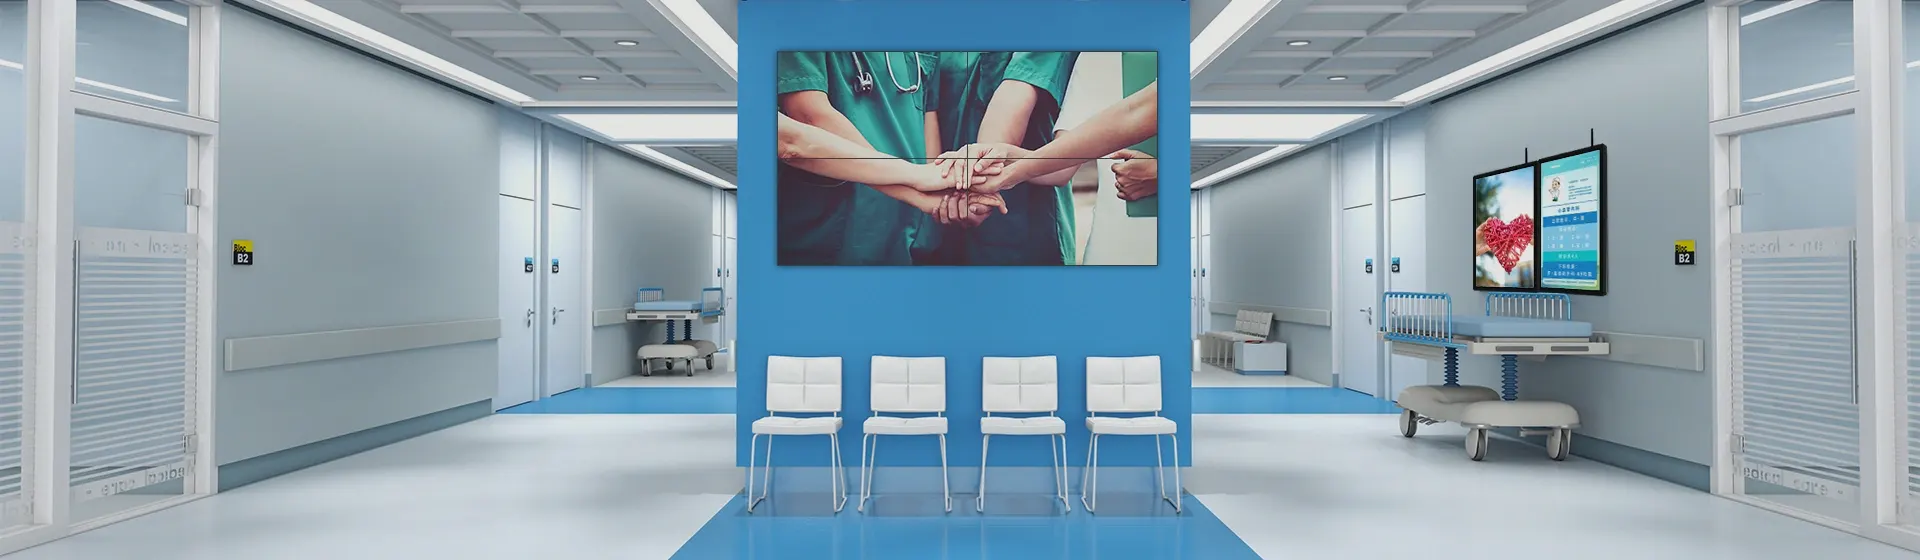 commercial LCD display in the Medical Industry Application Solution